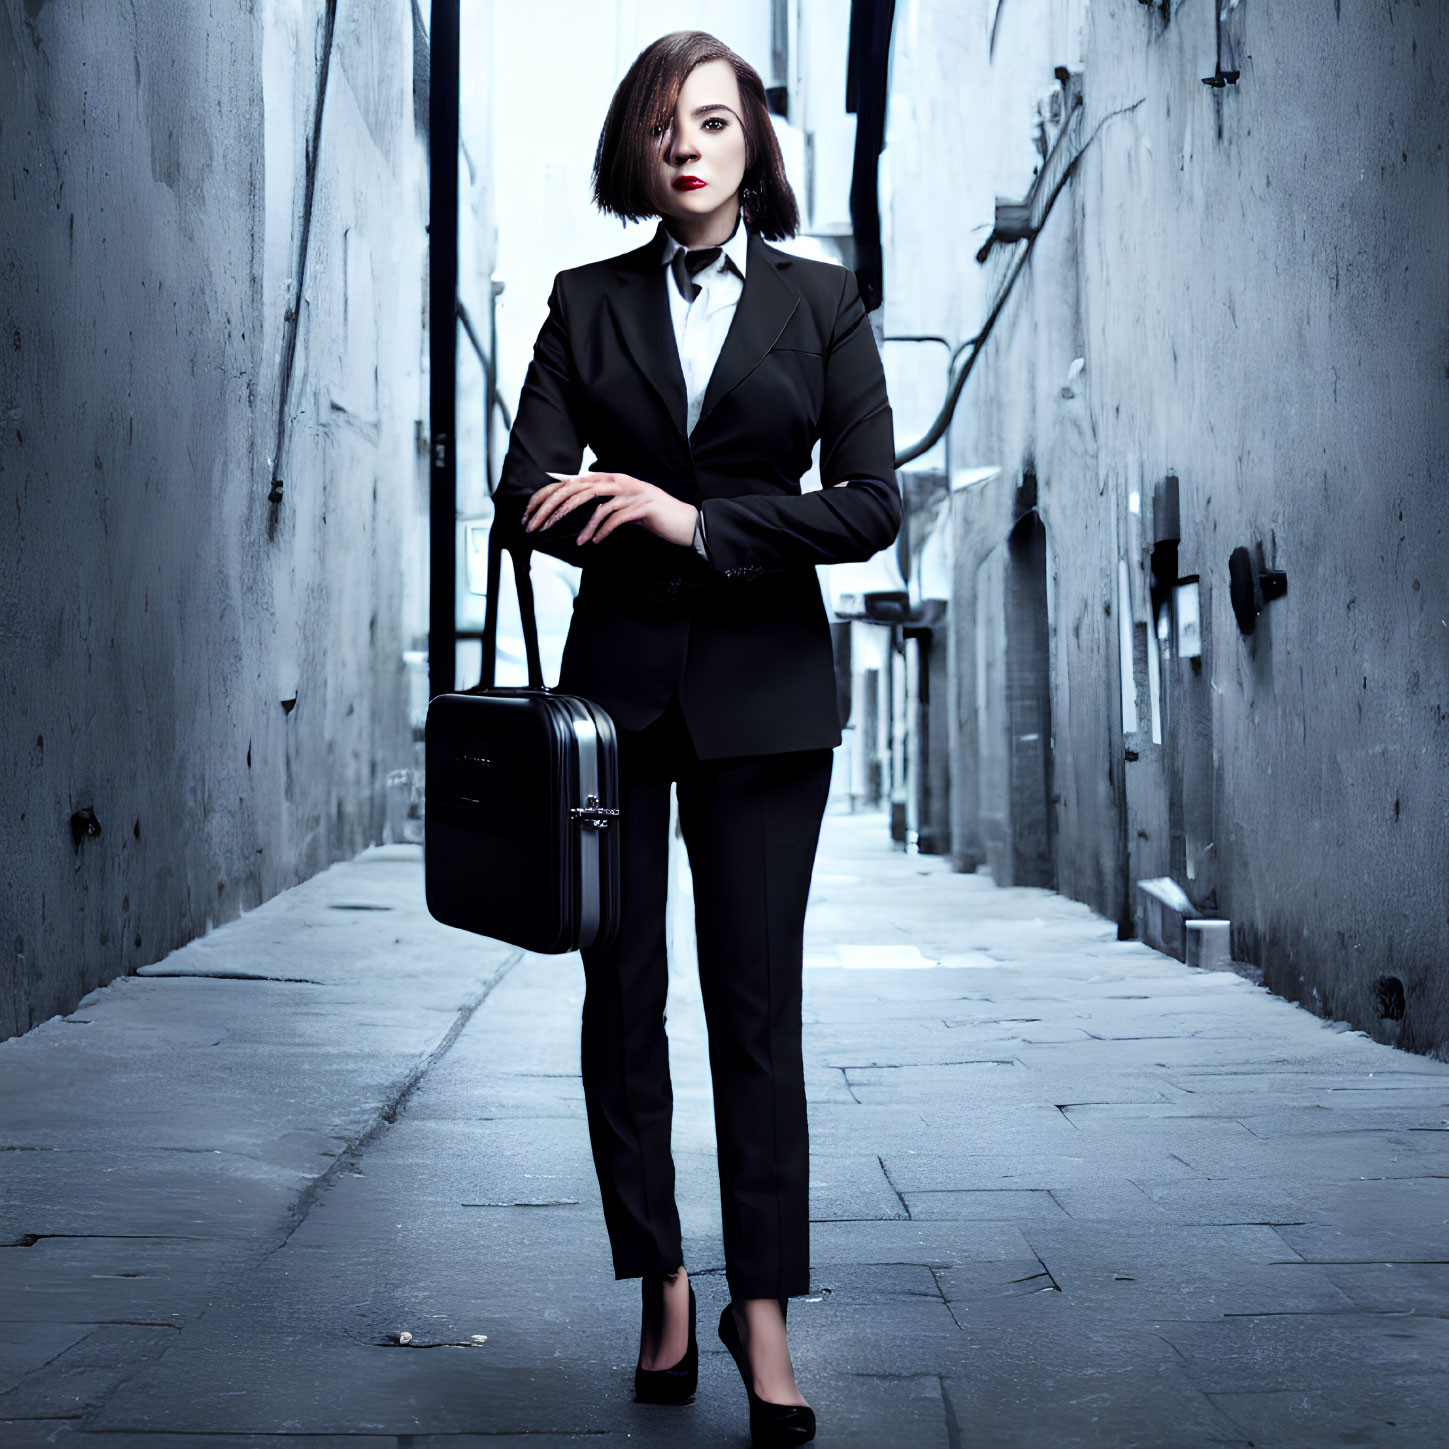 Confident professional woman in black suit with briefcase in narrow alleyway